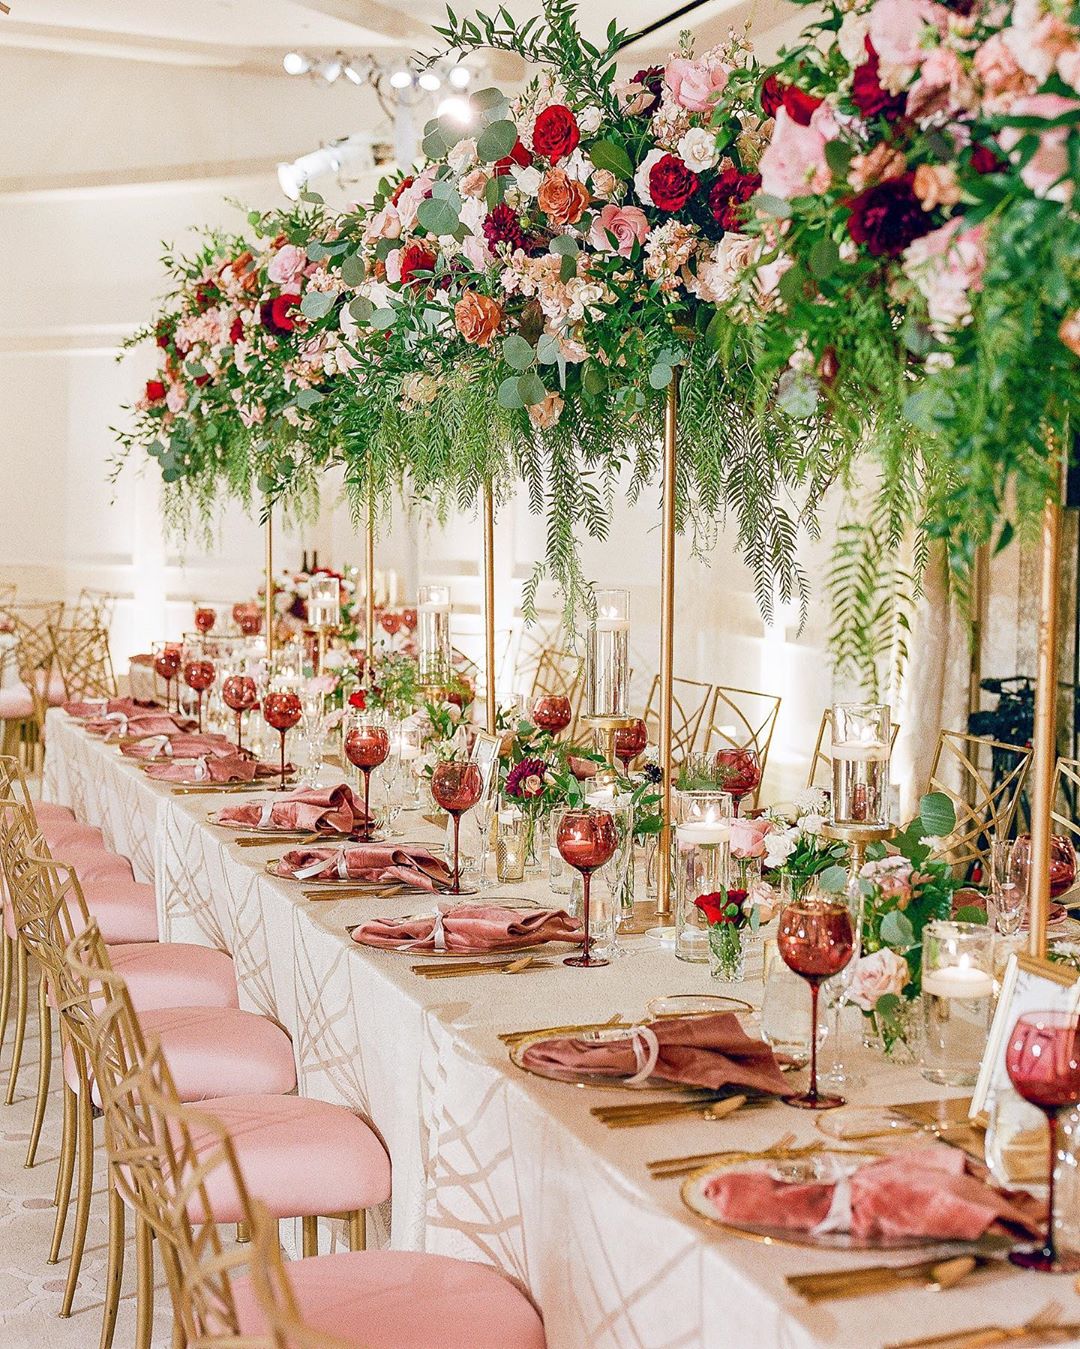 Table with pink chairs and centerpieces of bright red flowers. Photo by Instagram user @alexwphotography